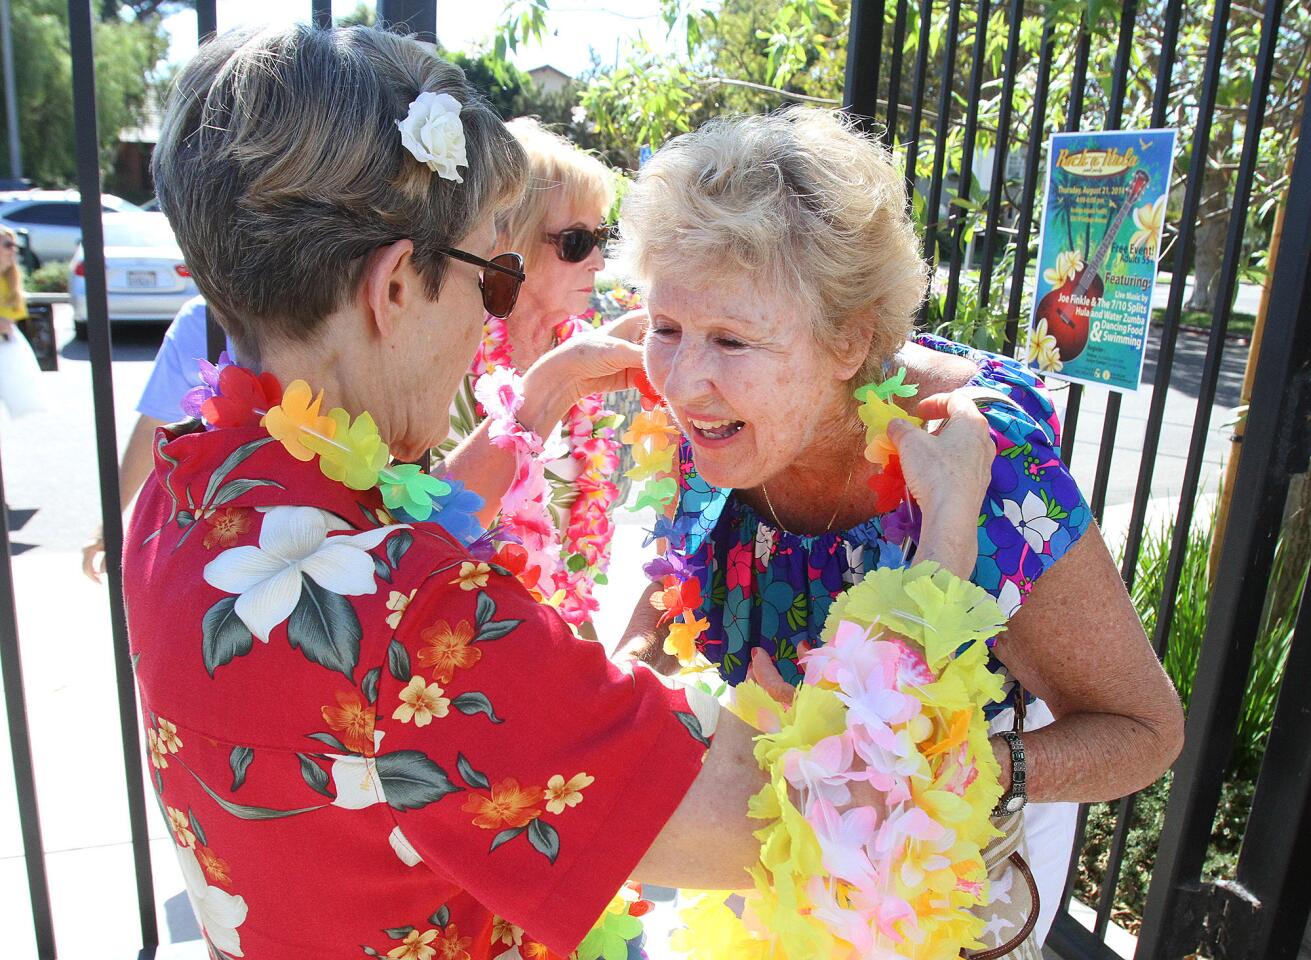 Photo Gallery: First ever "Rock-a-Hula" for seniors at Verdugo Pool